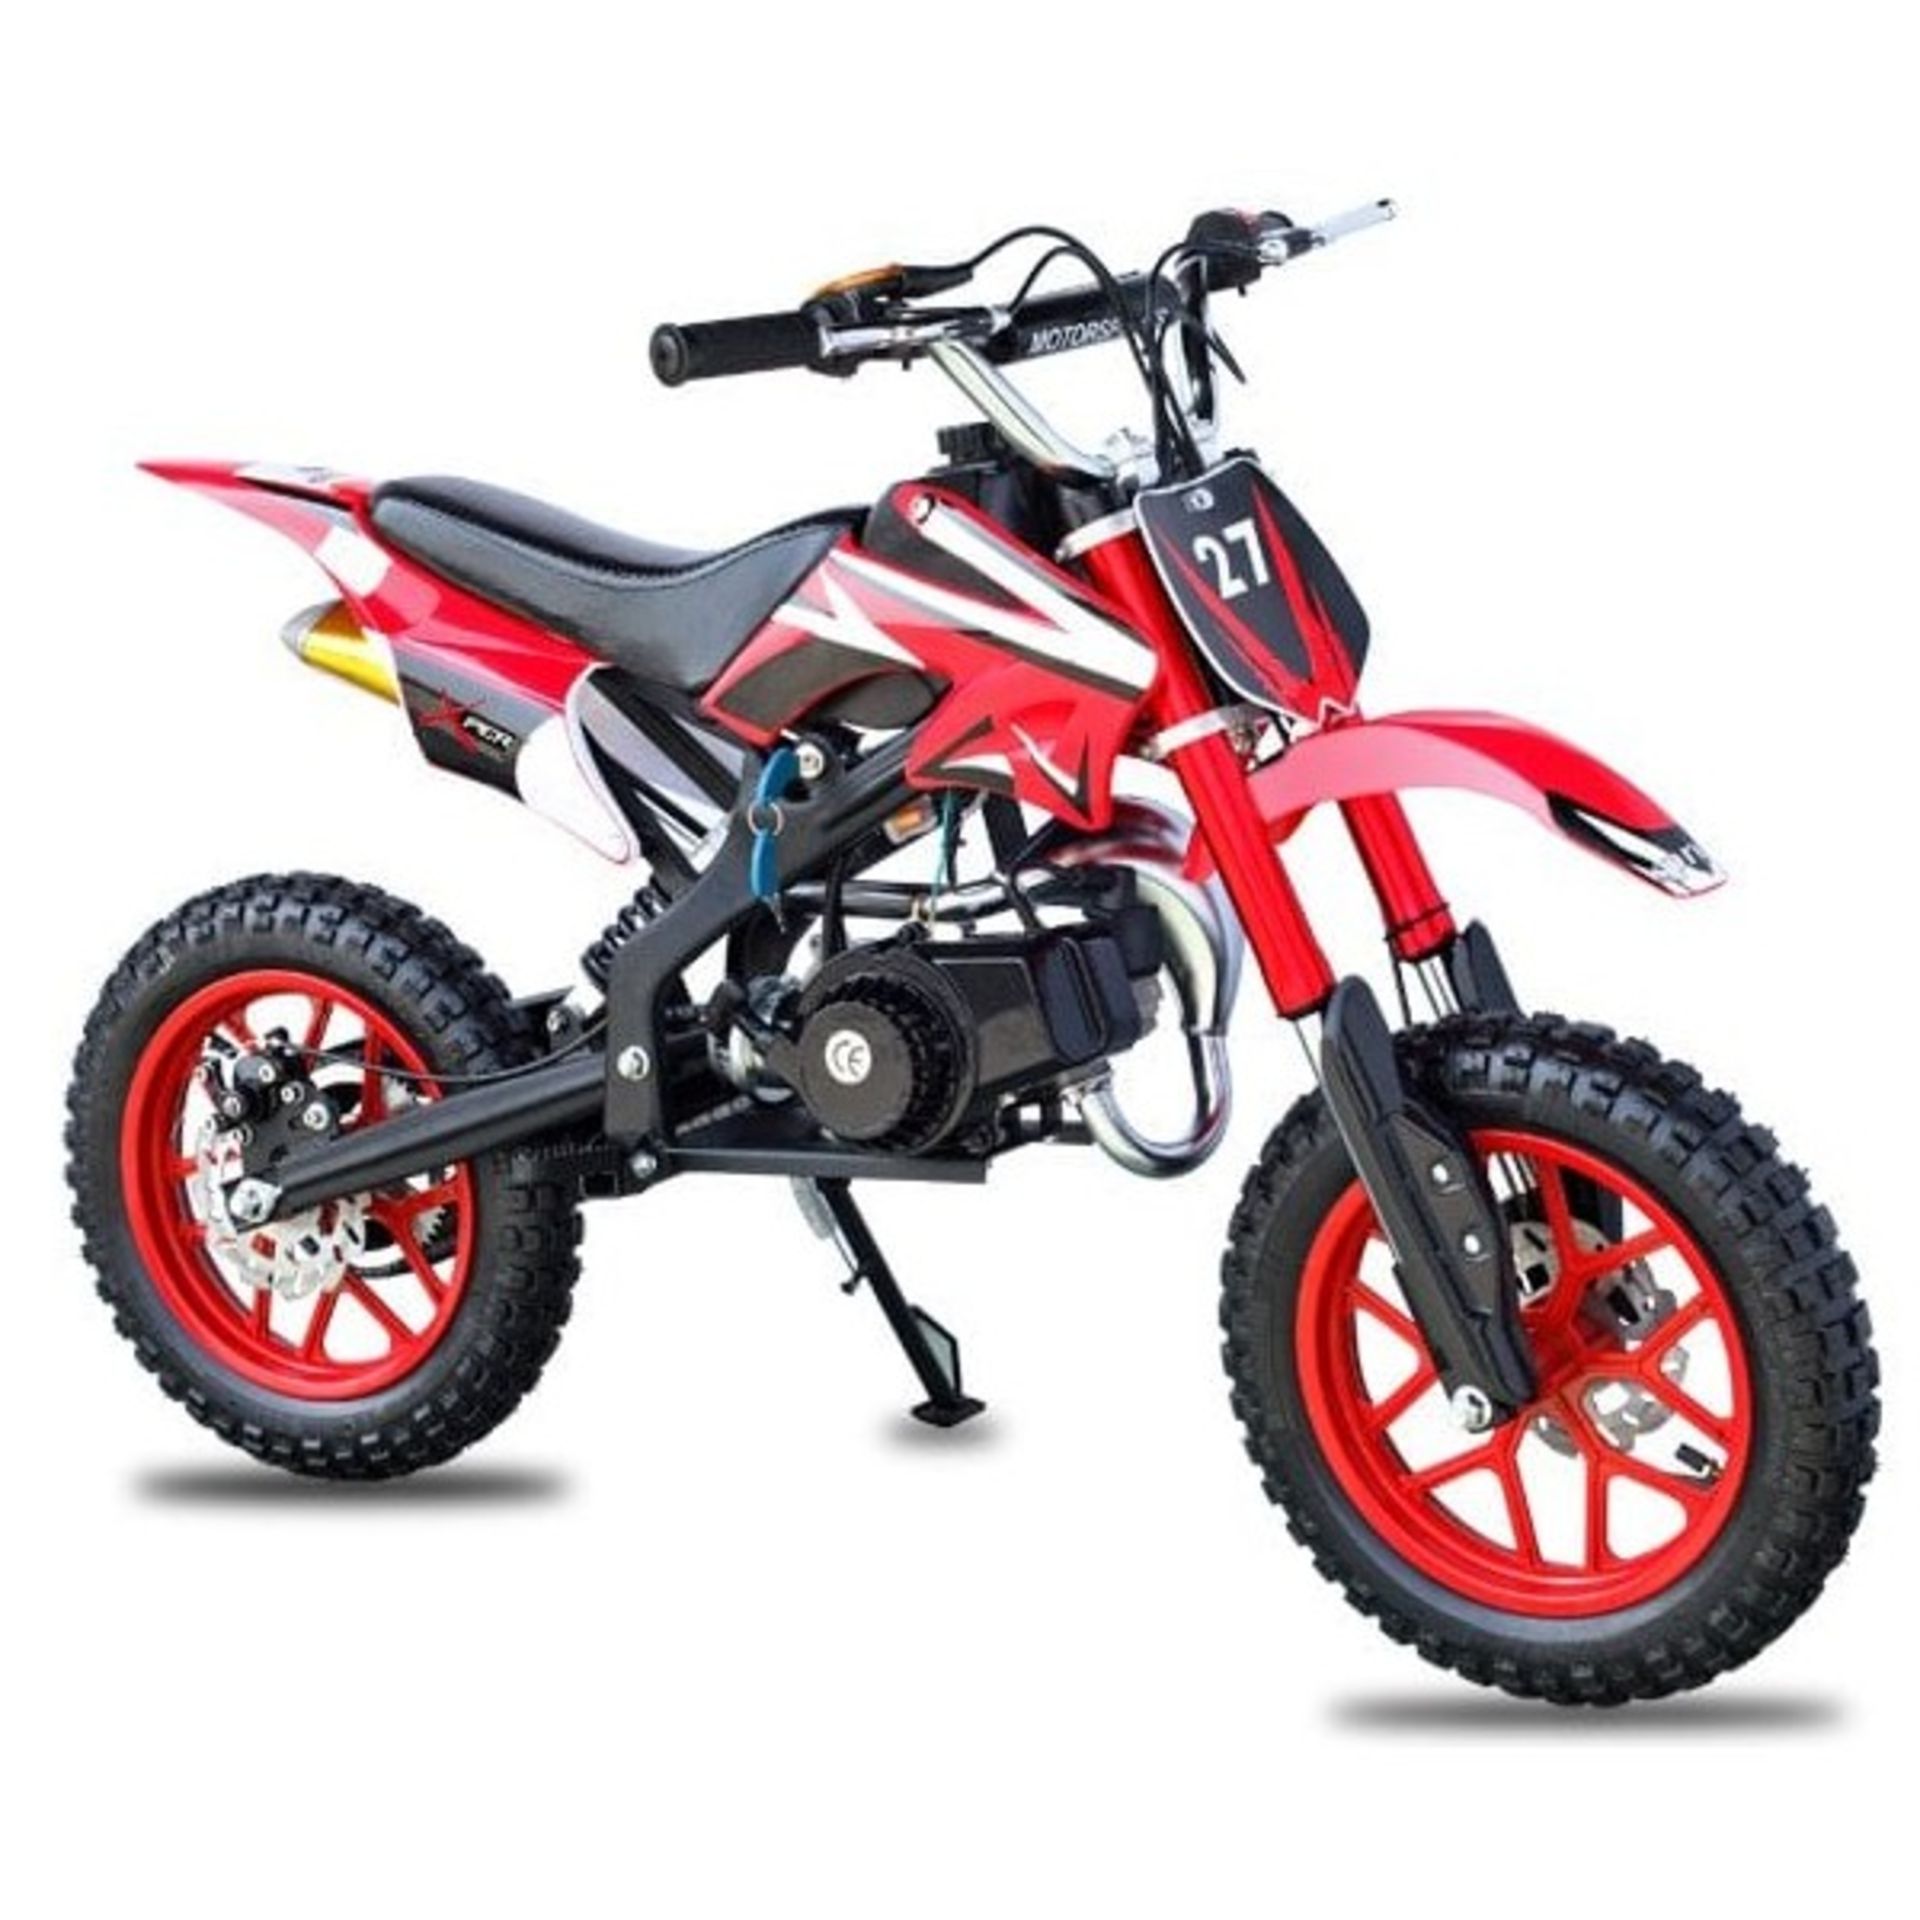 V Brand New 50cc Delta Mini Bike - Colour May Vary - Two Stroke - Single Cylinder - Image 2 of 8